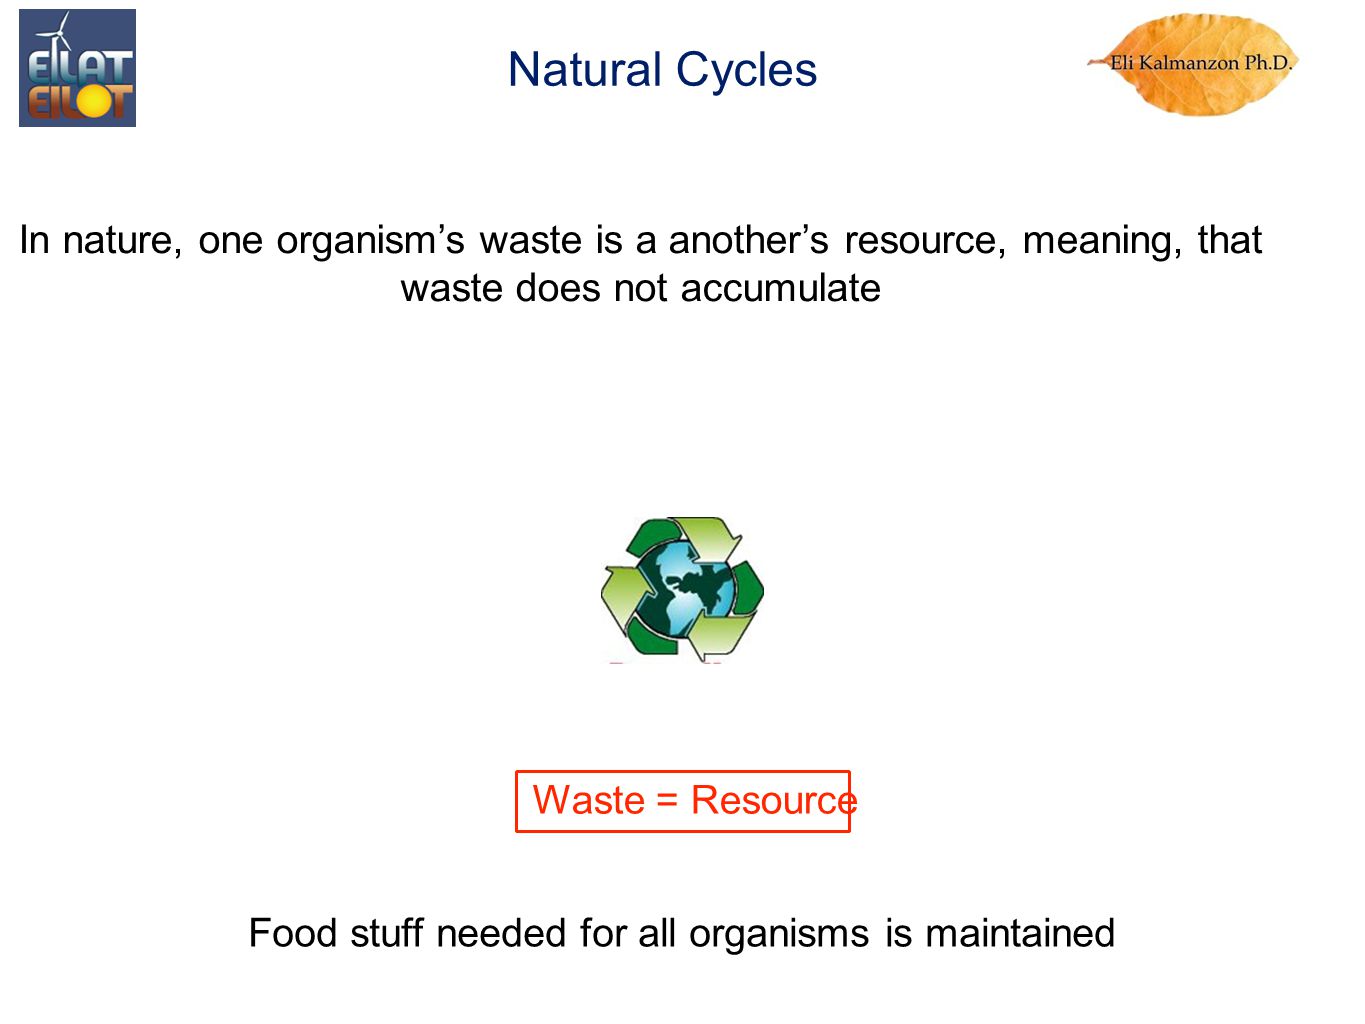 Natural Cycles In nature, one organism’s waste is a another’s resource, meaning, that waste does not accumulate Food stuff needed for all organisms is maintained Waste = Resource